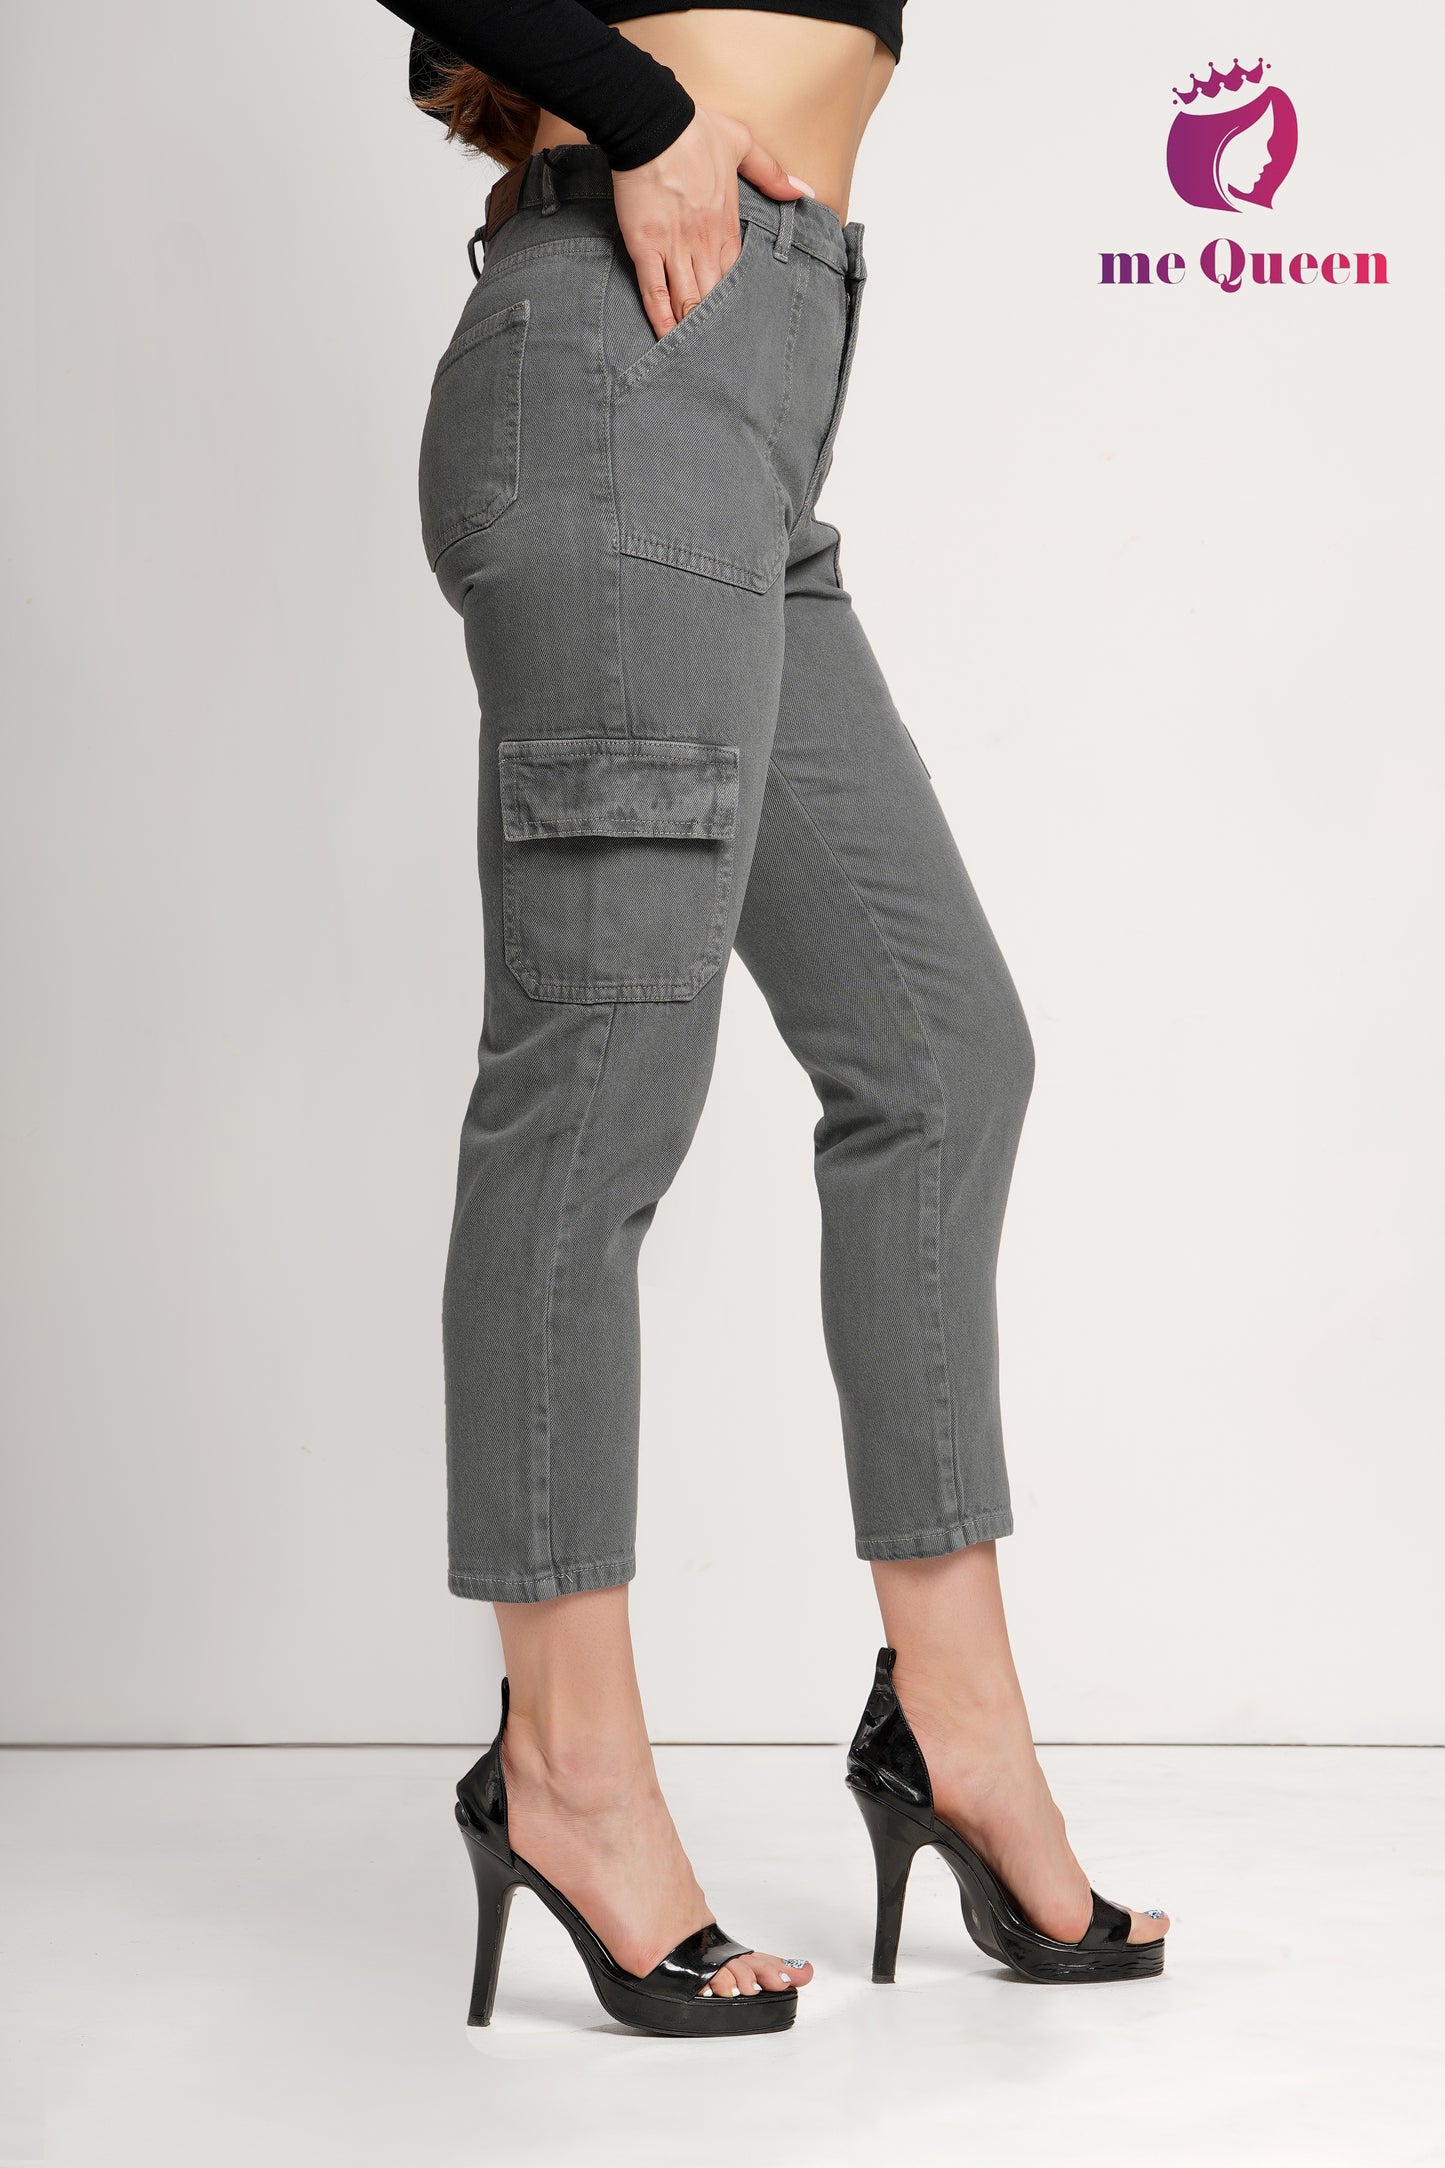 MeQueen Women's Gray Fit Denim Jeans with 2 Flap Pockets